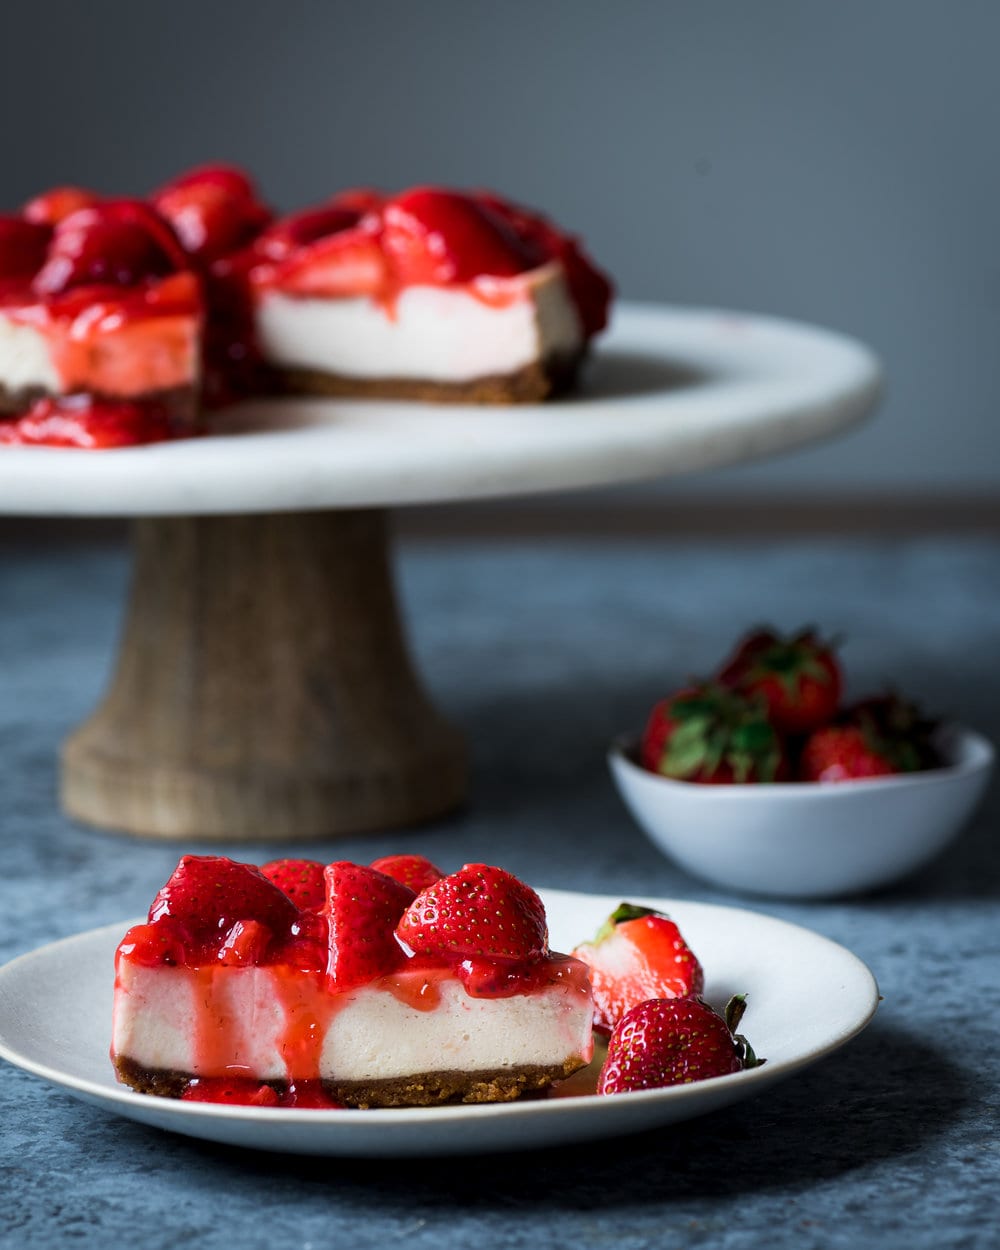 Vegan Instant Pot Cheesecake. How to Bake a Cheesecake in the Instant Pot.